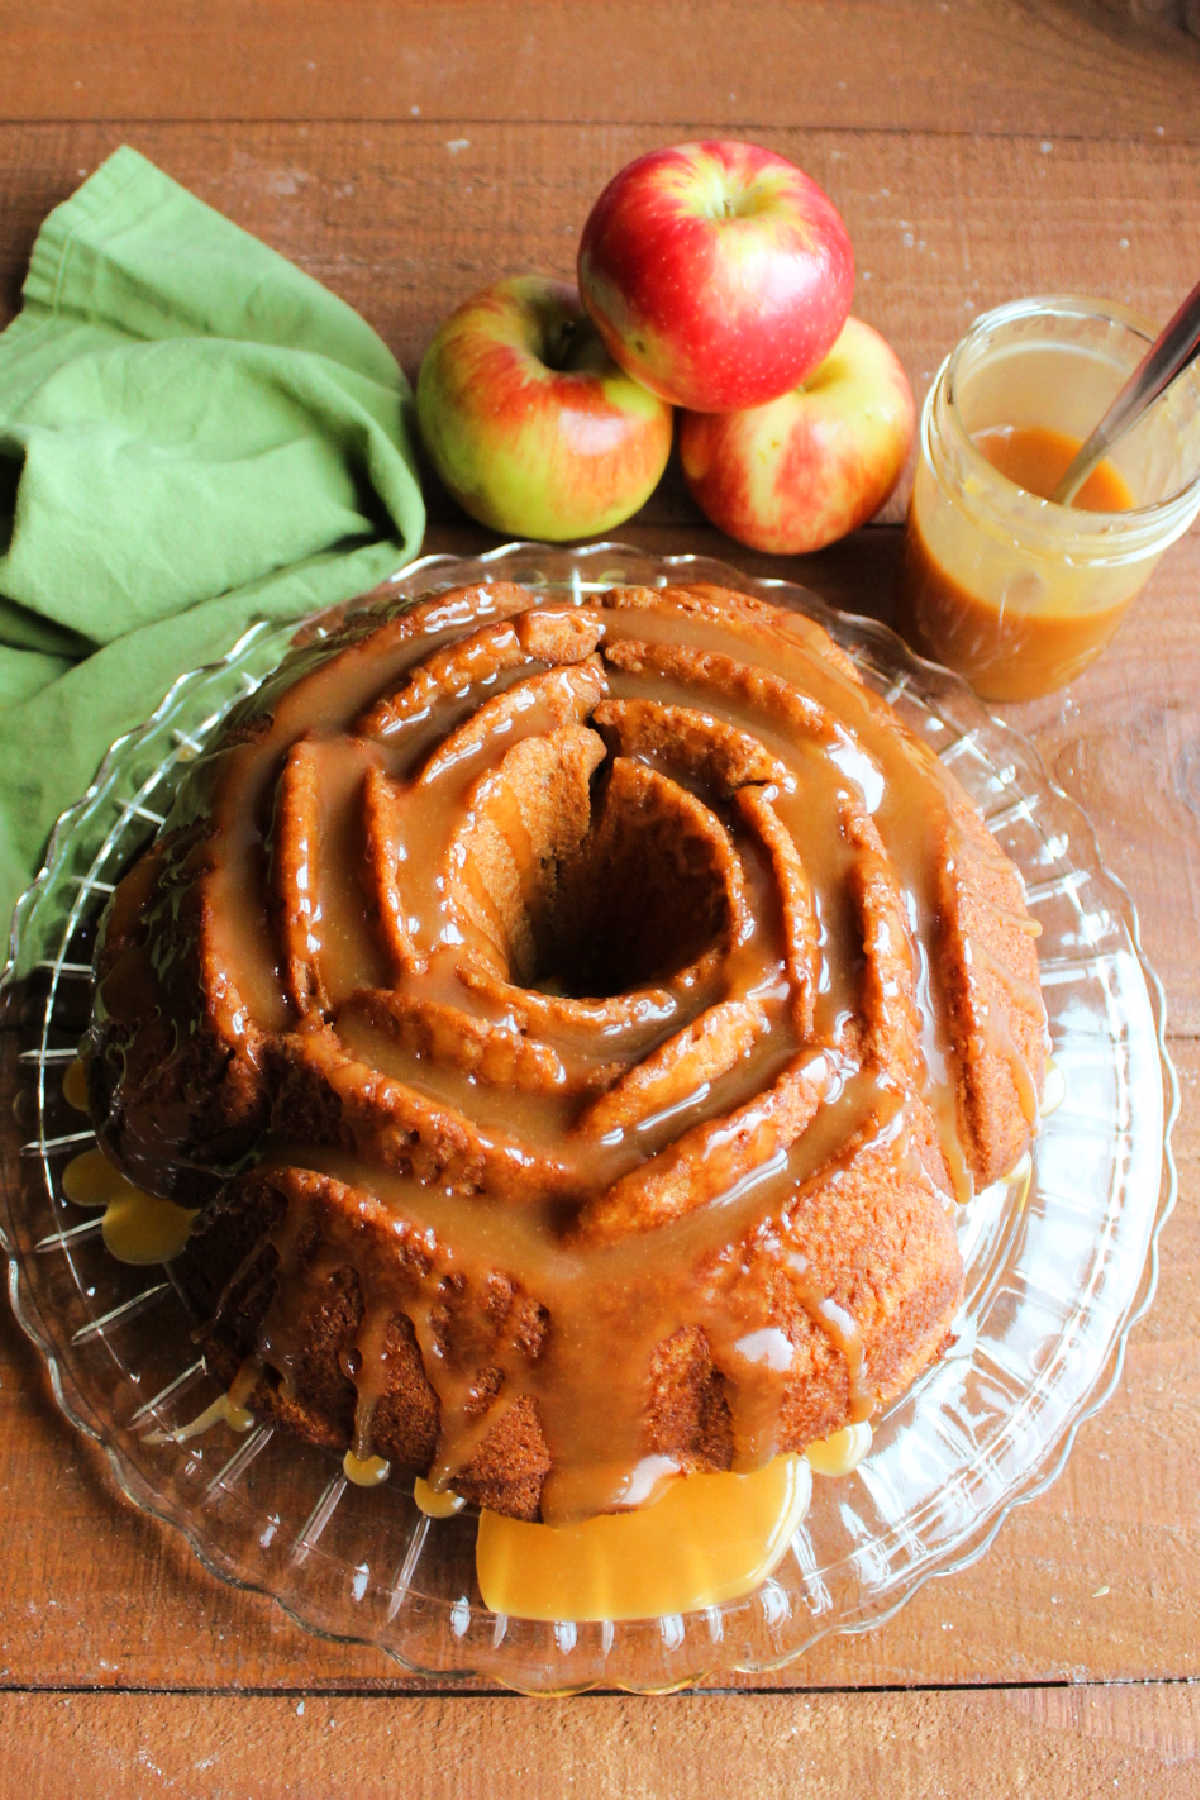 Whole flower shaped apple cider bundt cake with apples and a jar of caramel sauce in the background.